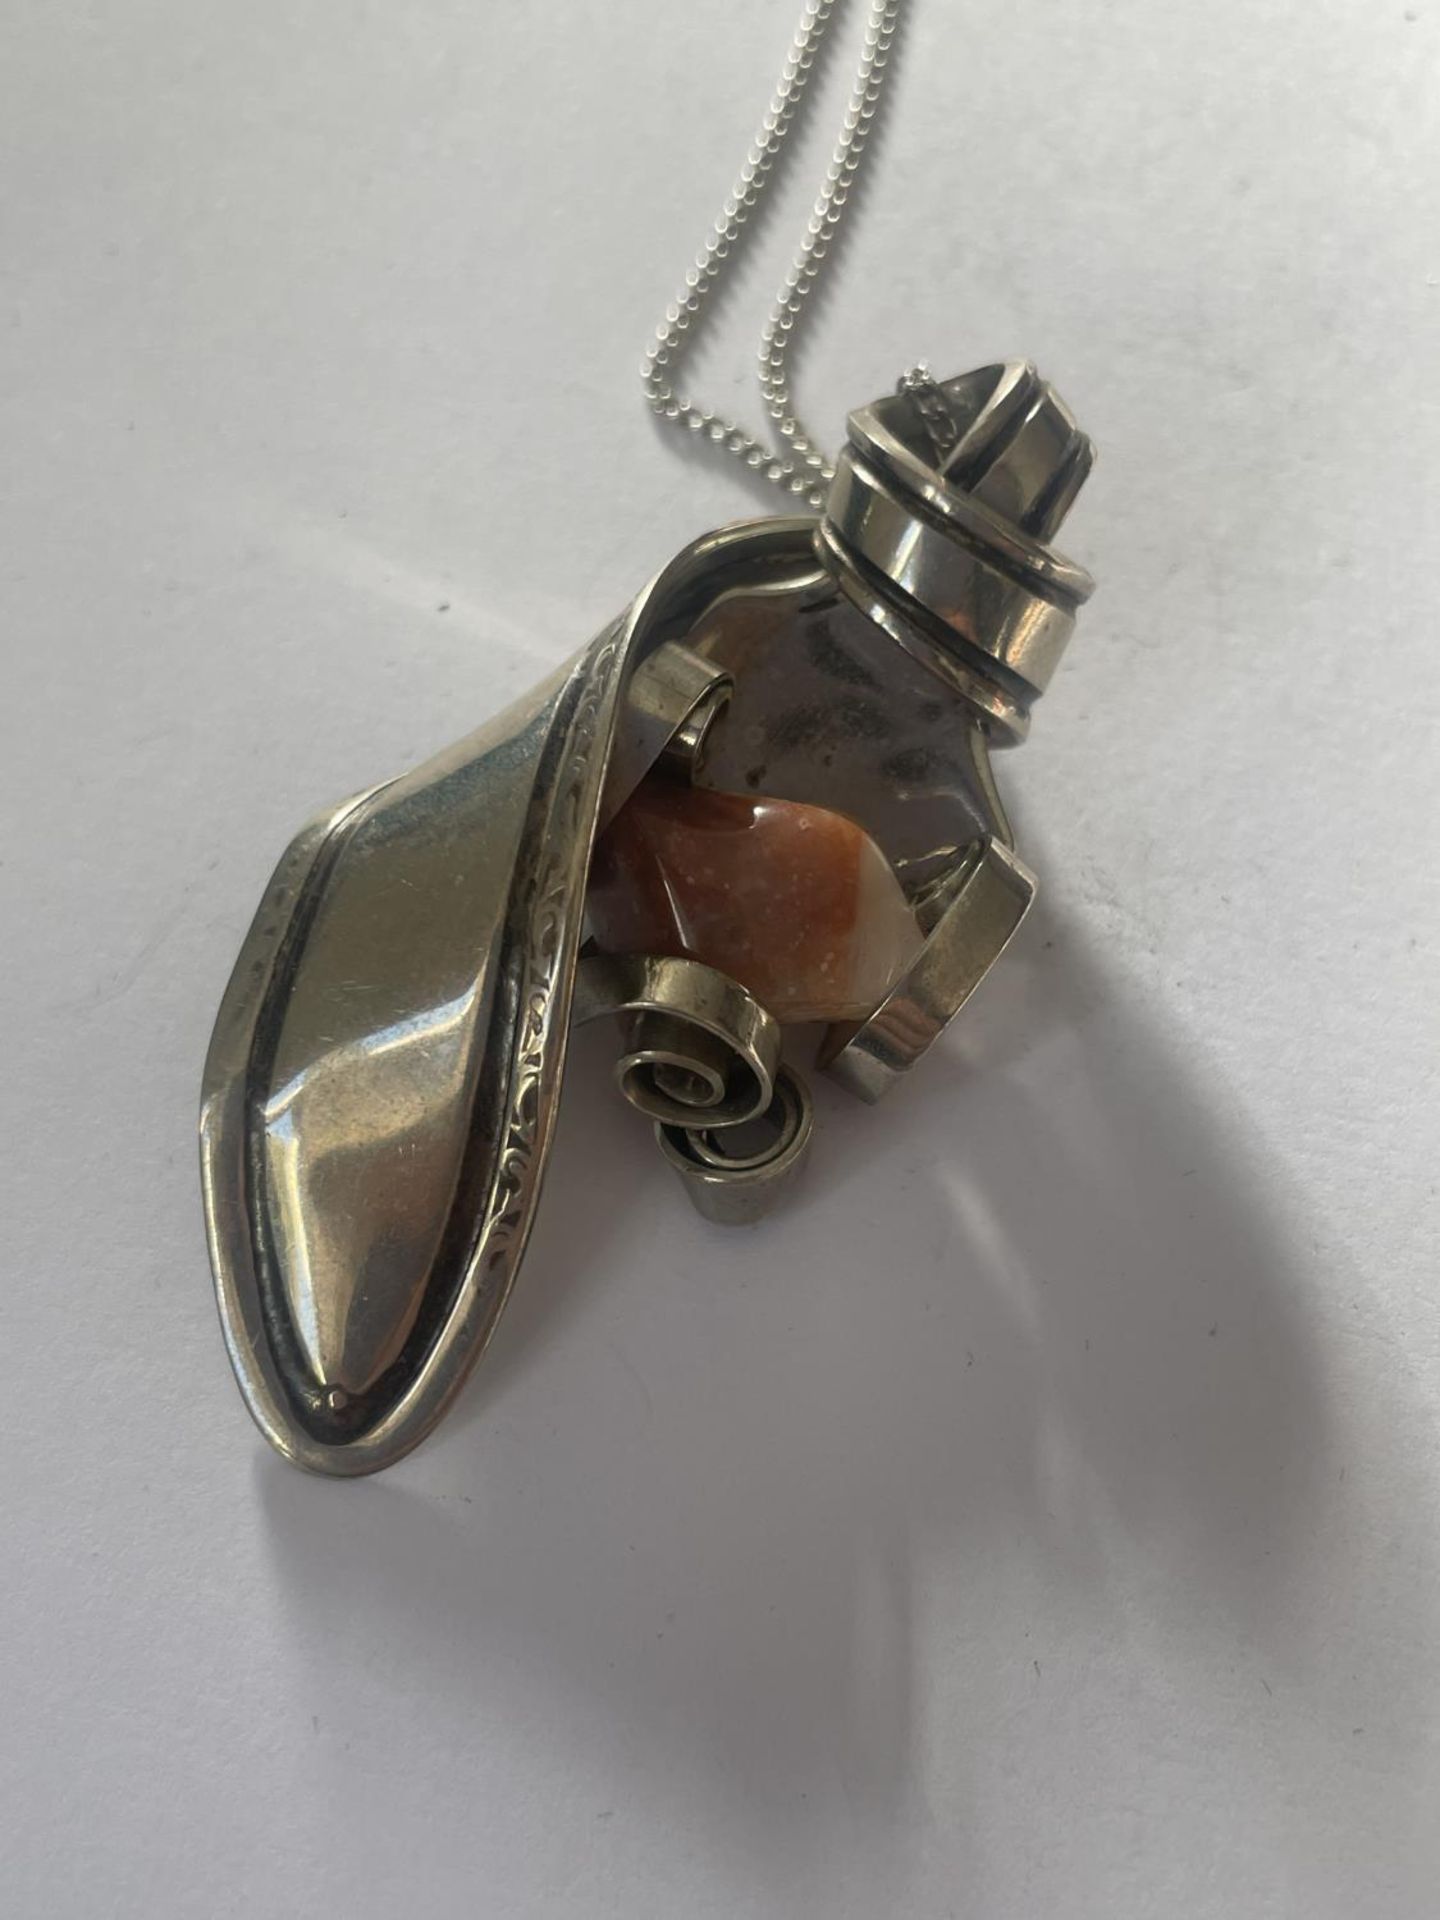 AN ORNATE WHITE METAL SPOON AND AGATE PENDANT - Image 3 of 4